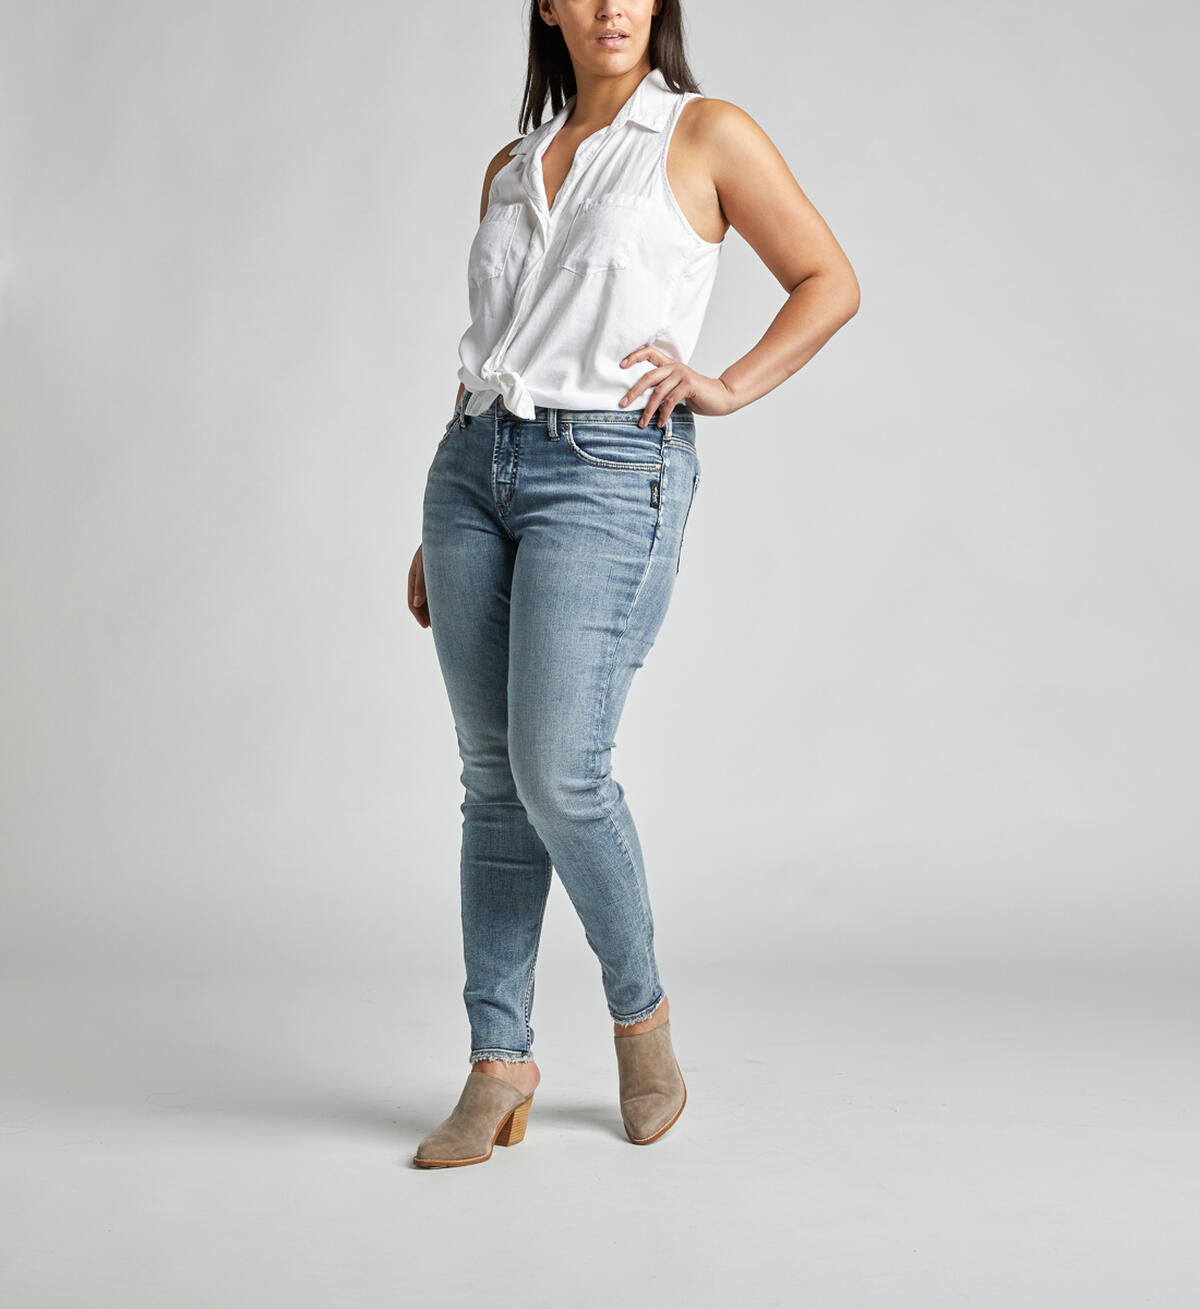 Avery High-Rise Curvy Skinny Jeans, , hi-res image number 0